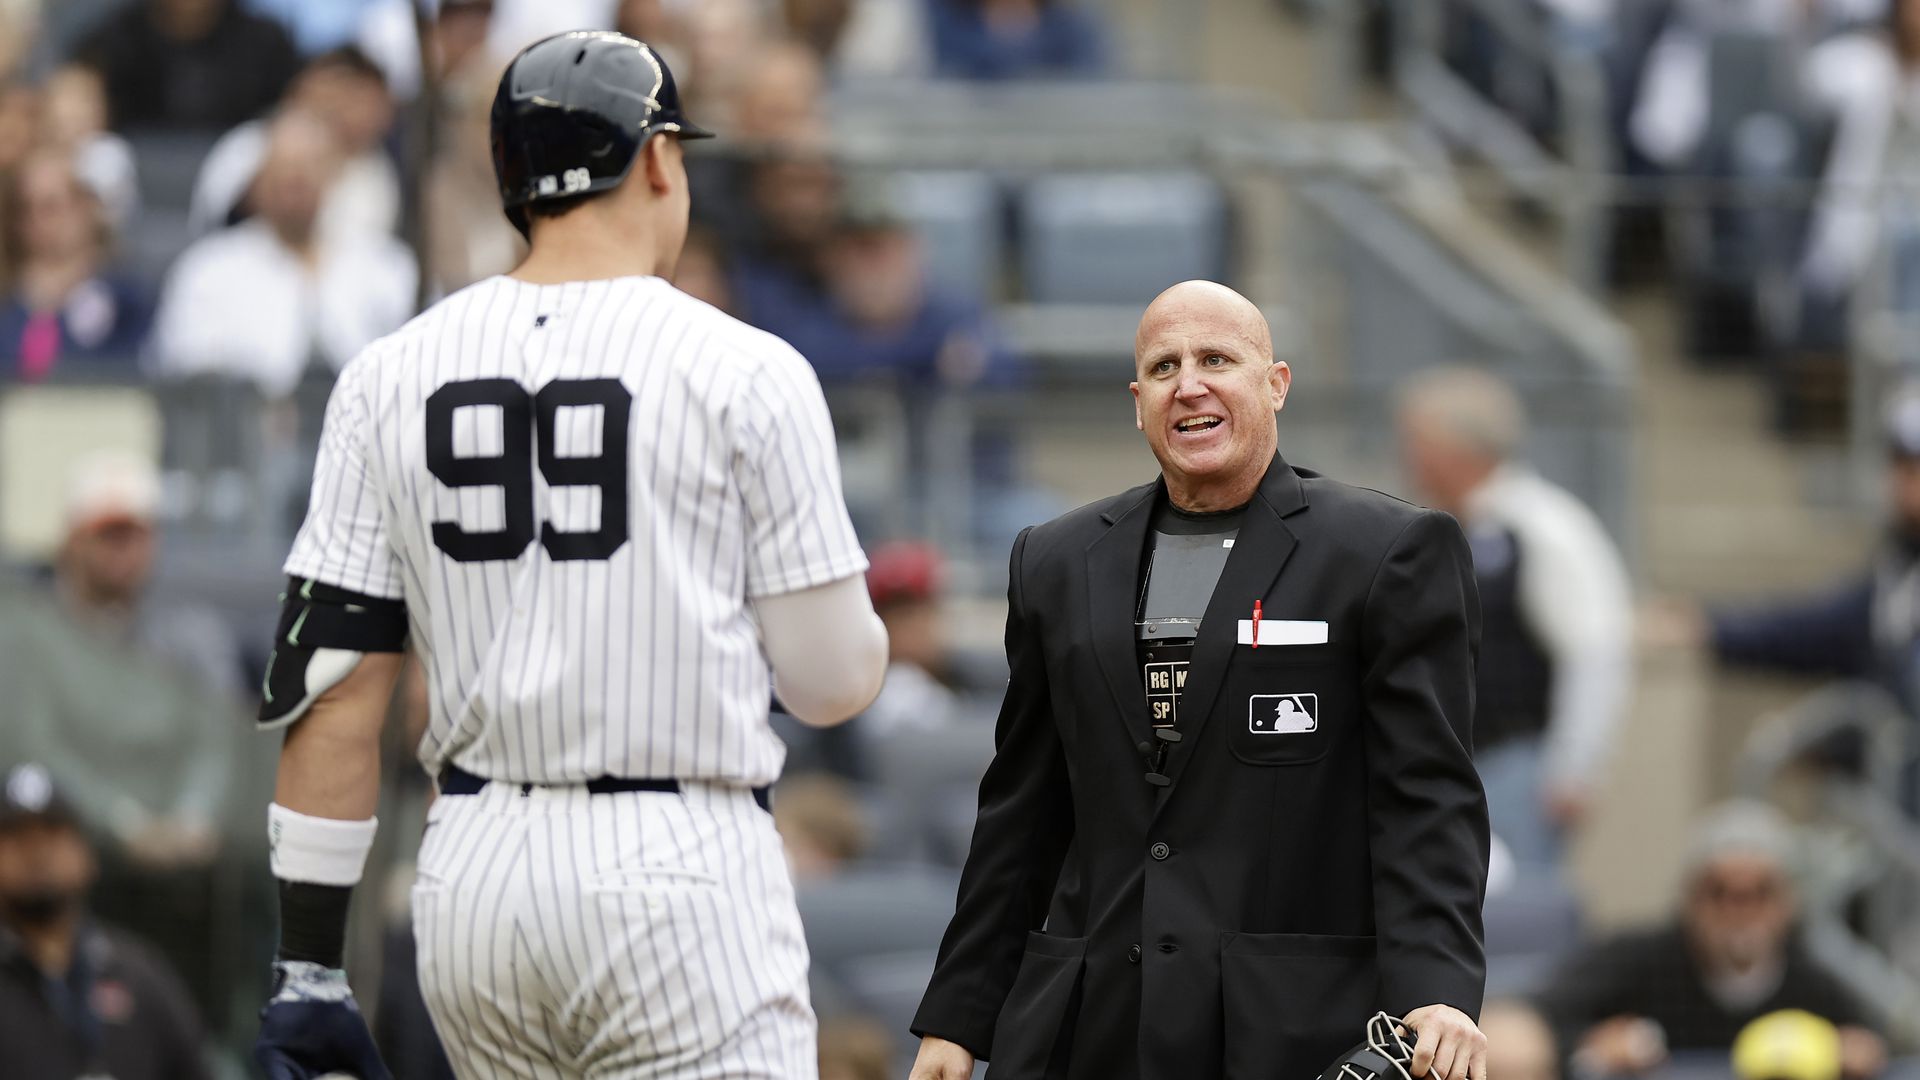 nyy news: judge tossed, cole tossing